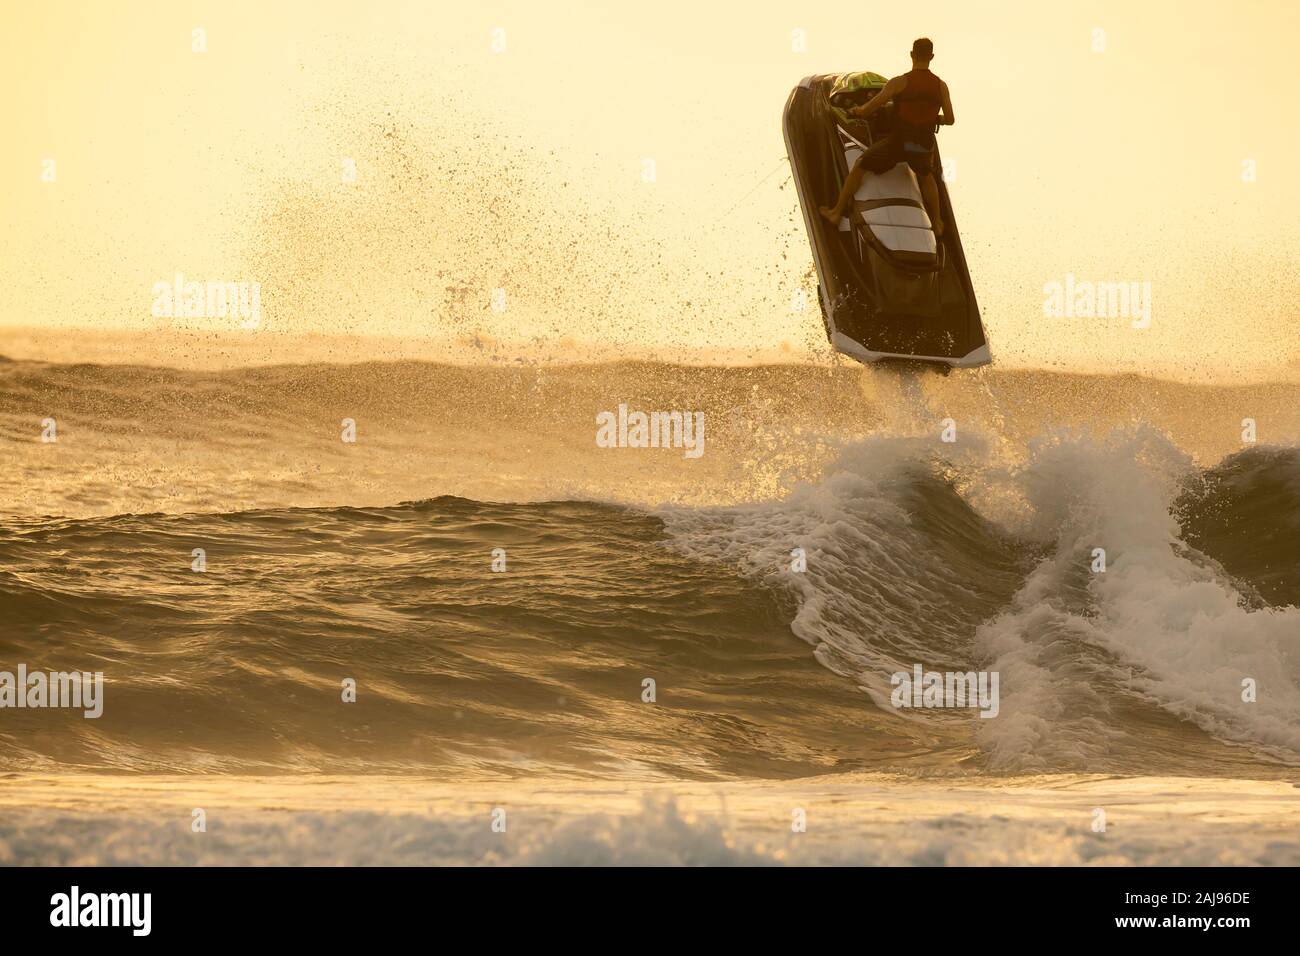 Silhouette of man riding a water scooter and jumping over a wave on sunrise Stock Photo